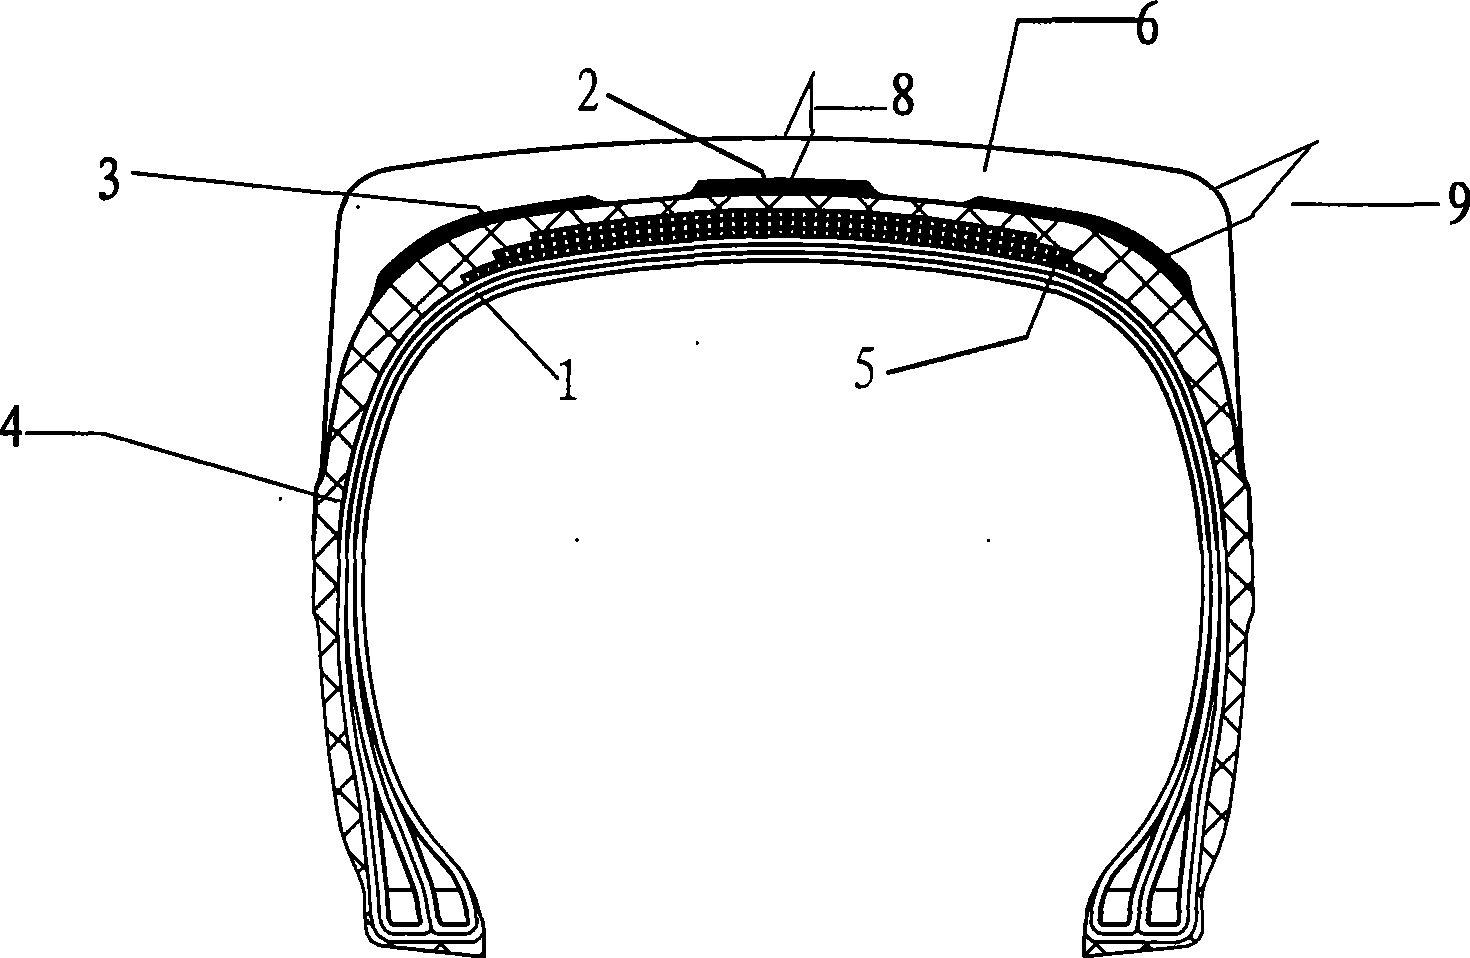 High piercing-resistance, cutting-resistant semi-steel engineering tyre and manufacturing method thereof